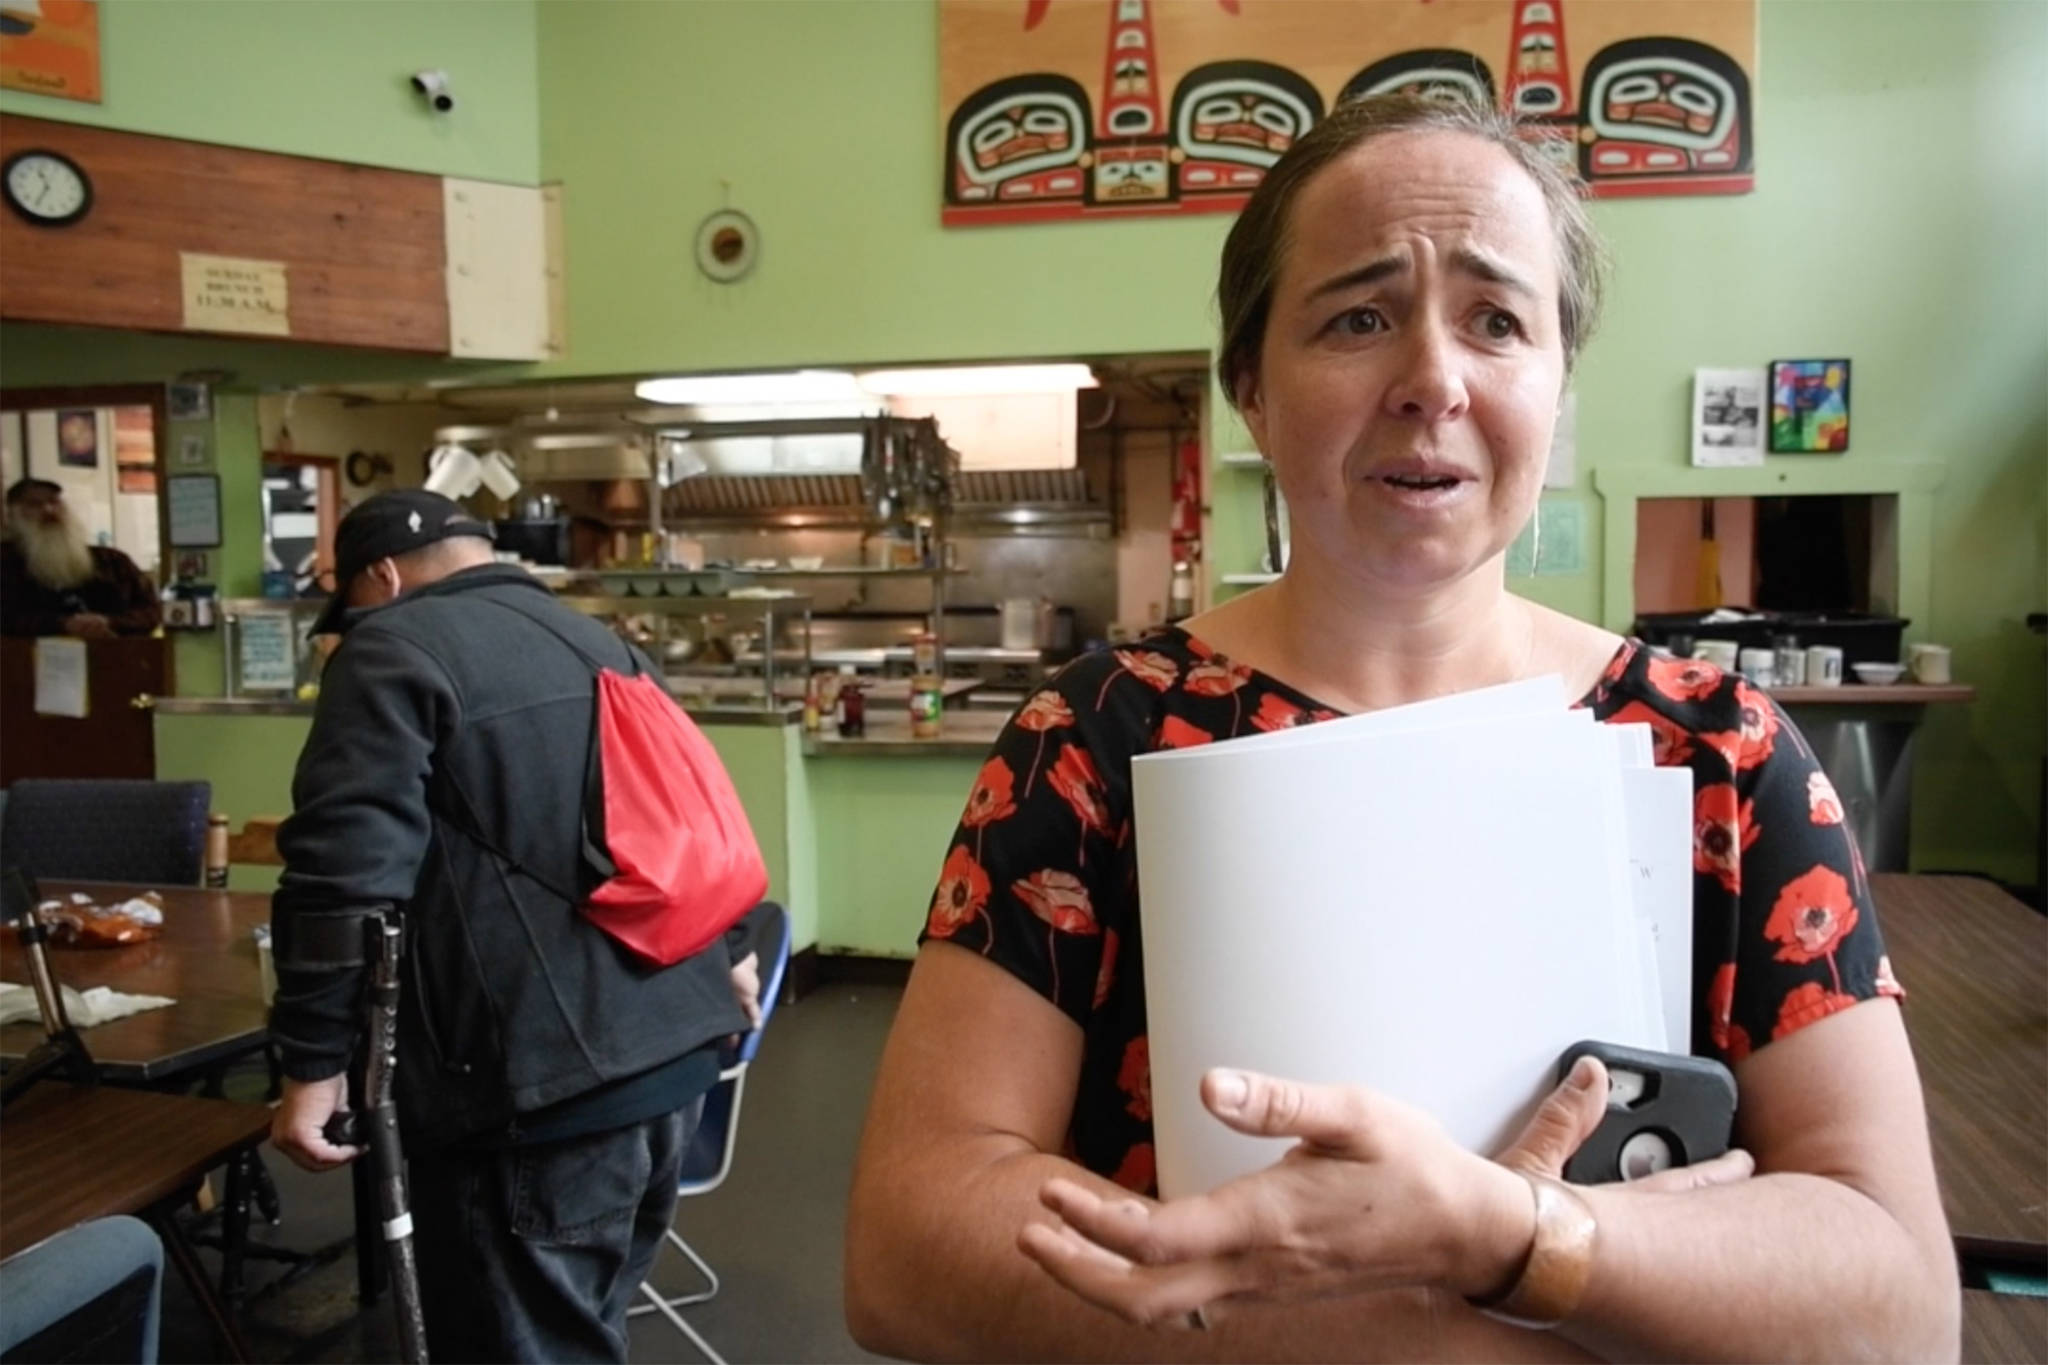 Mariya Lovishchuk, Executive Director of the Glory Hall -- Juneau’s homeless shelter and soup kitchen -- speaks Wednesday, July 17, 2019, about cuts in services that will take place starting next month with the elimination of state funding. Watch a full video online at juneauempire.com. (Michael Penn | Juneau Empire)